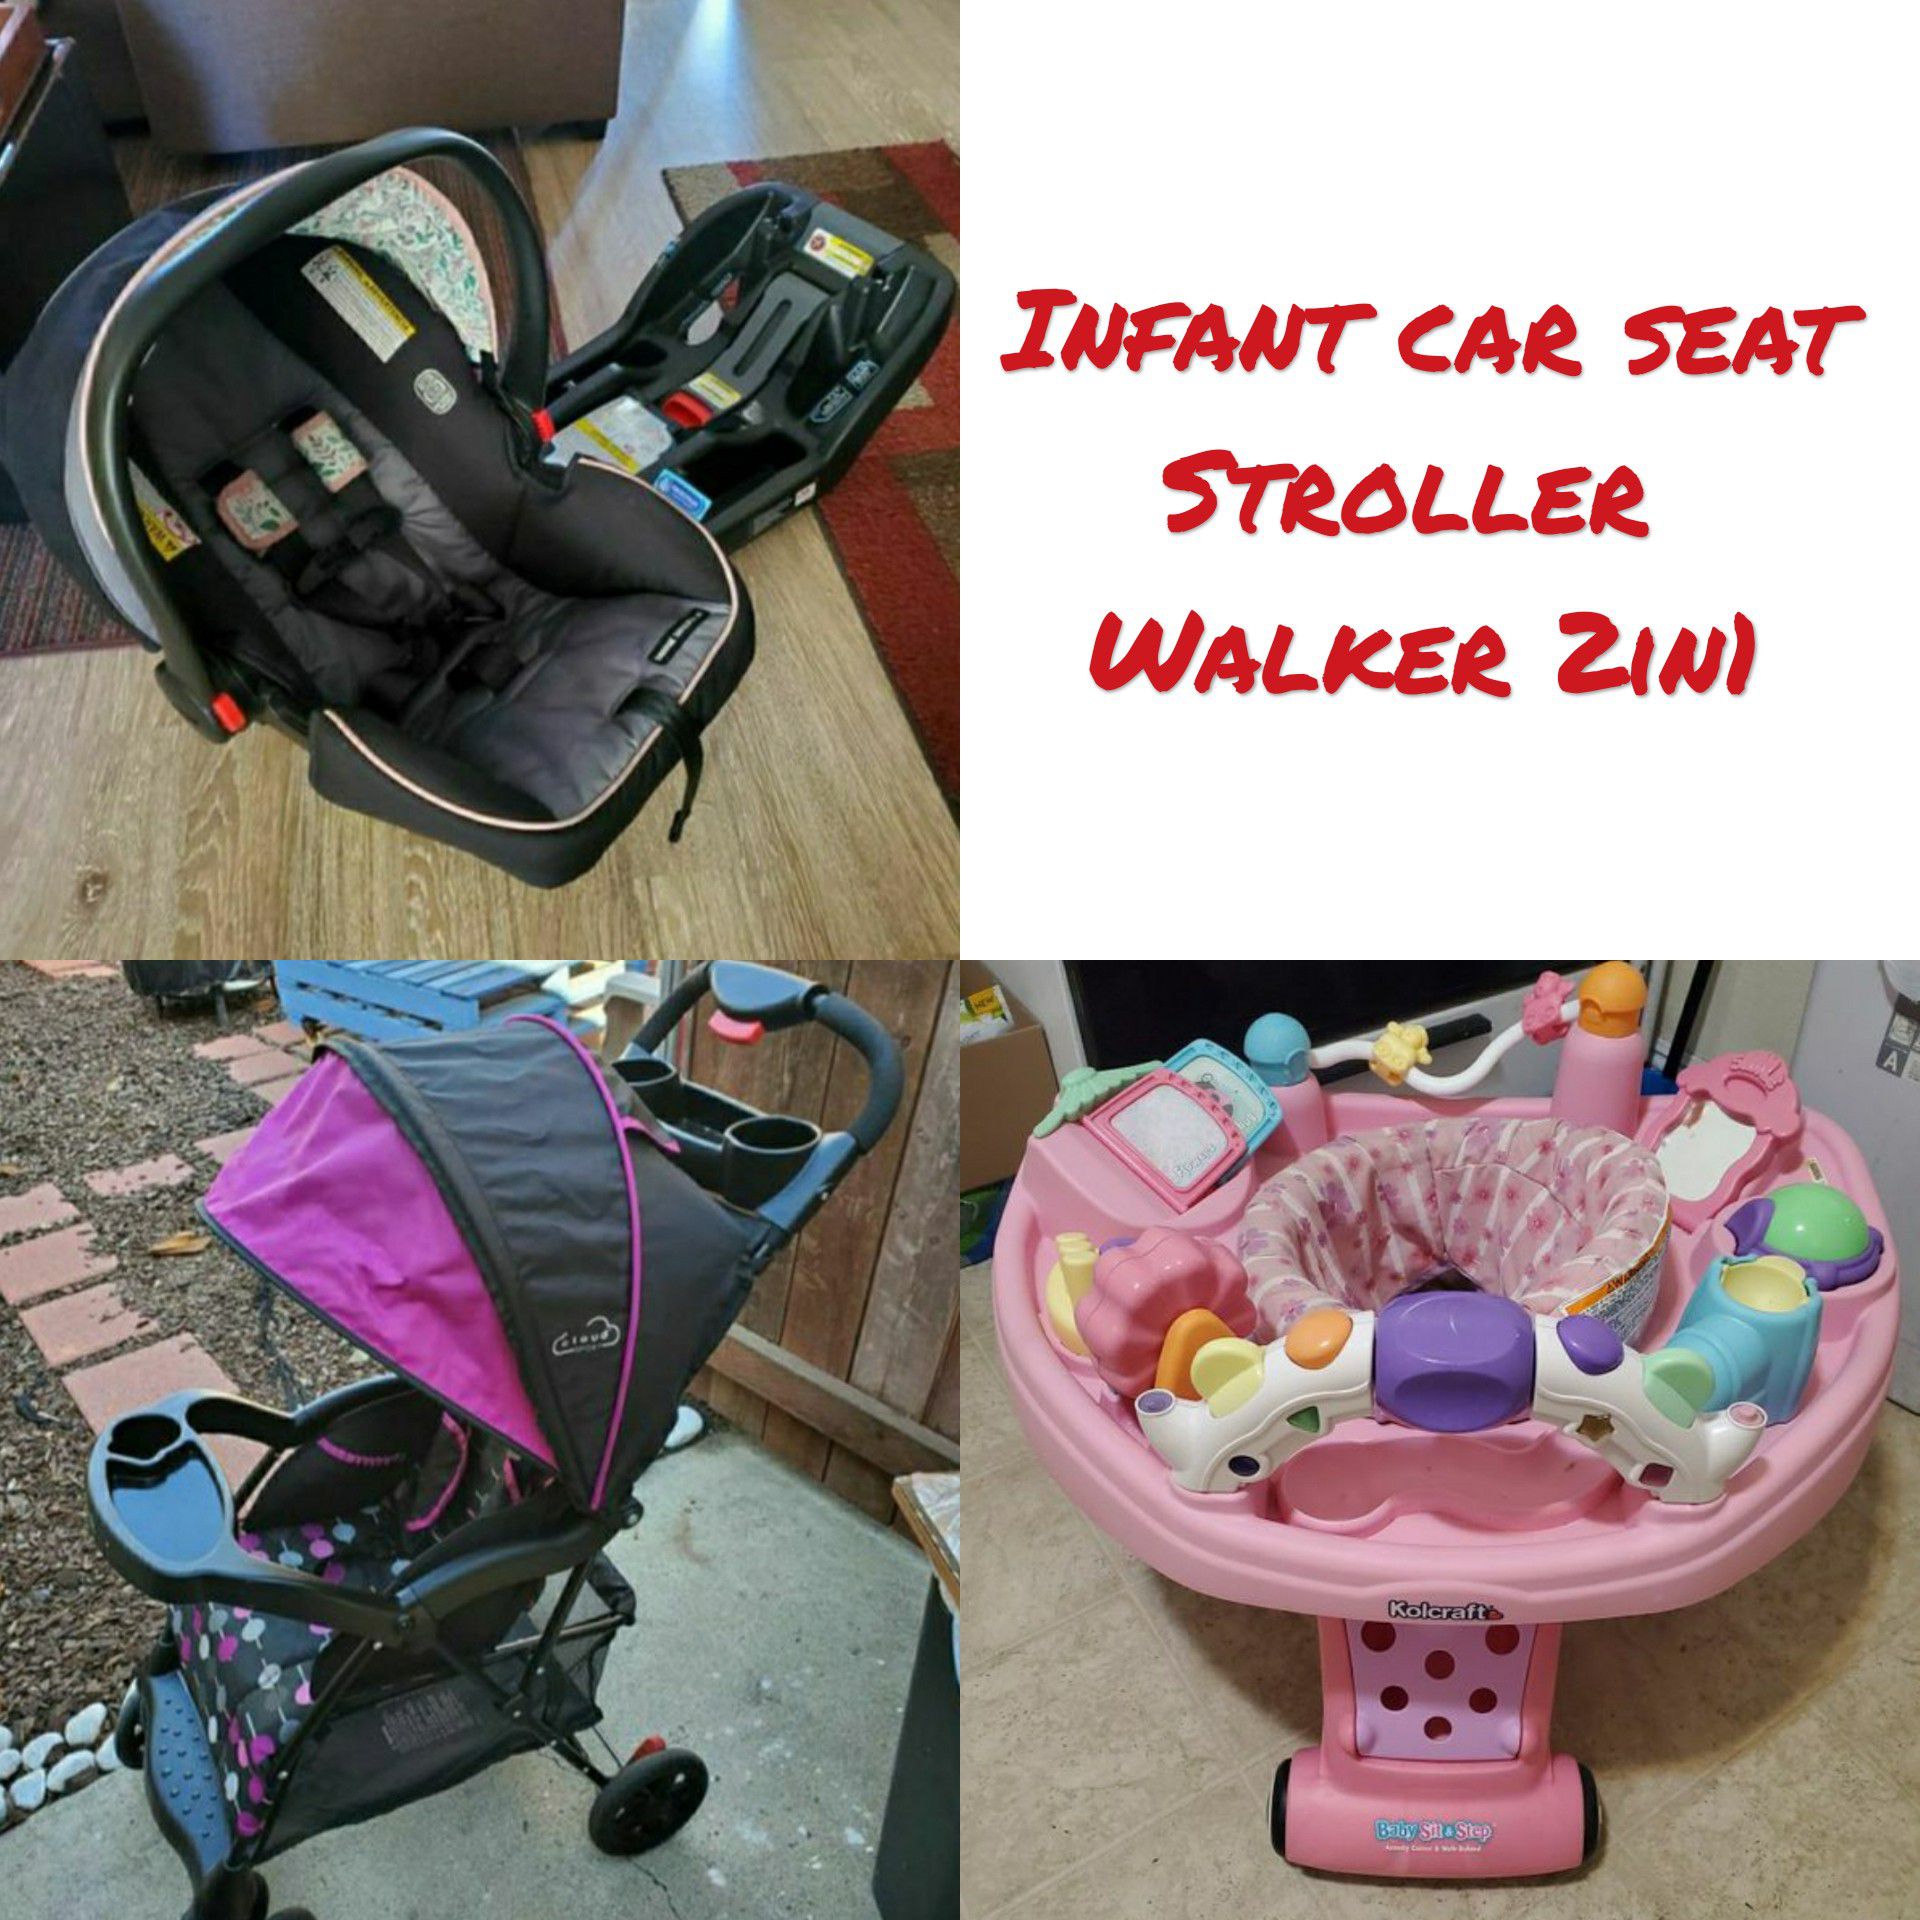 Infant car seat, stroller and walker 2in1. Special price.